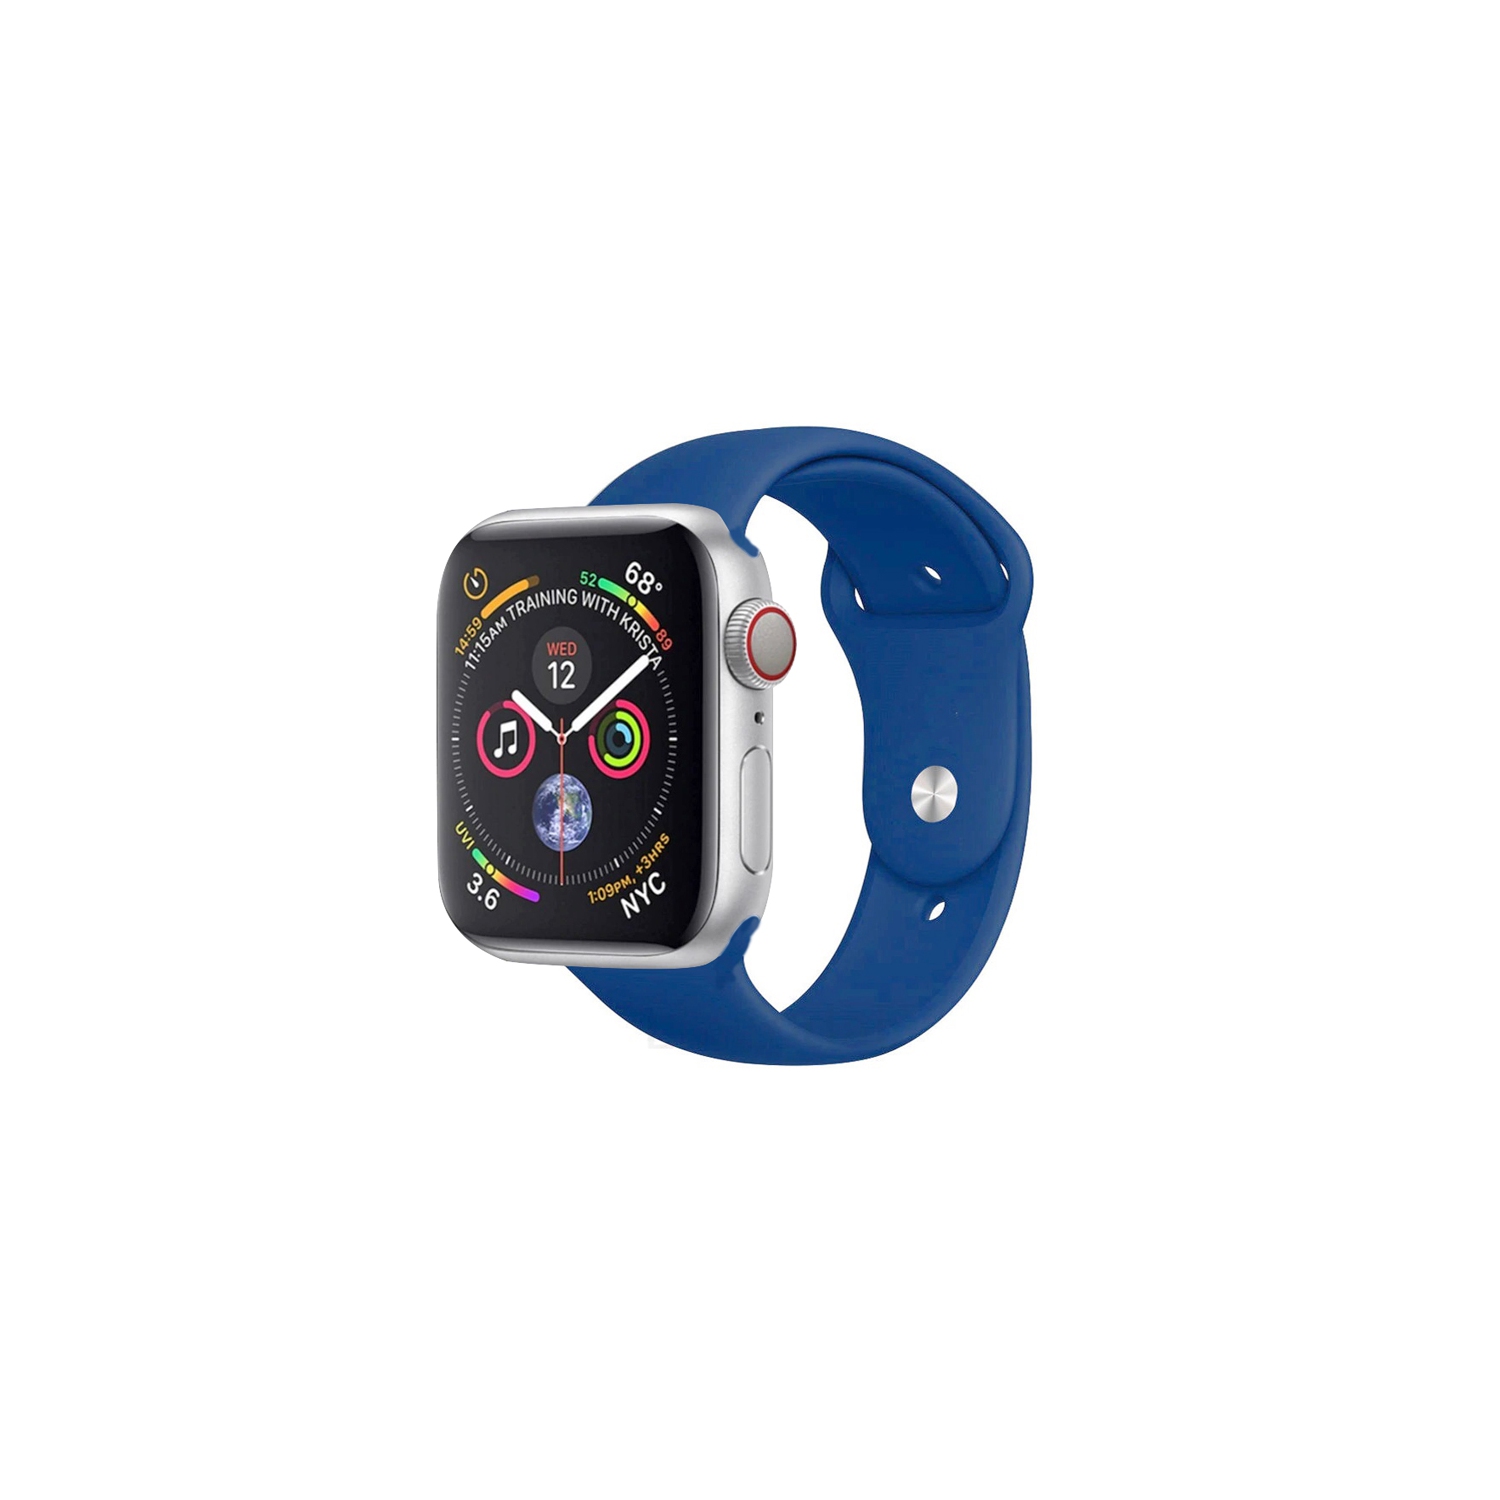 Watch Strap Silicone Sports Band Bracelet M/L Size For Apple iWatch Series 42mm/44mm - Cobalt Blue